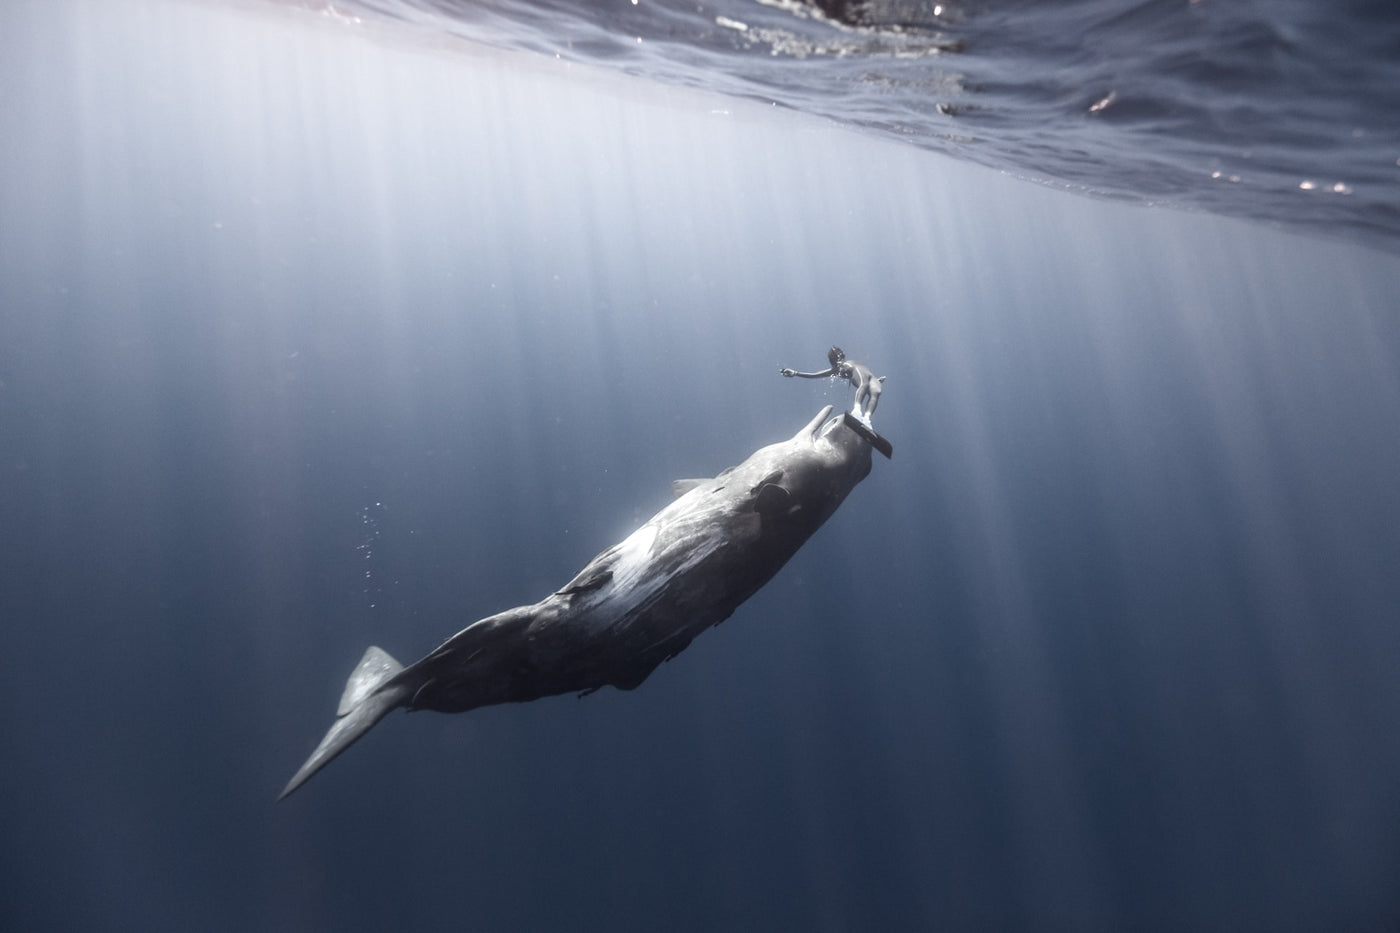 Underwater Photography: Freediving With Whales